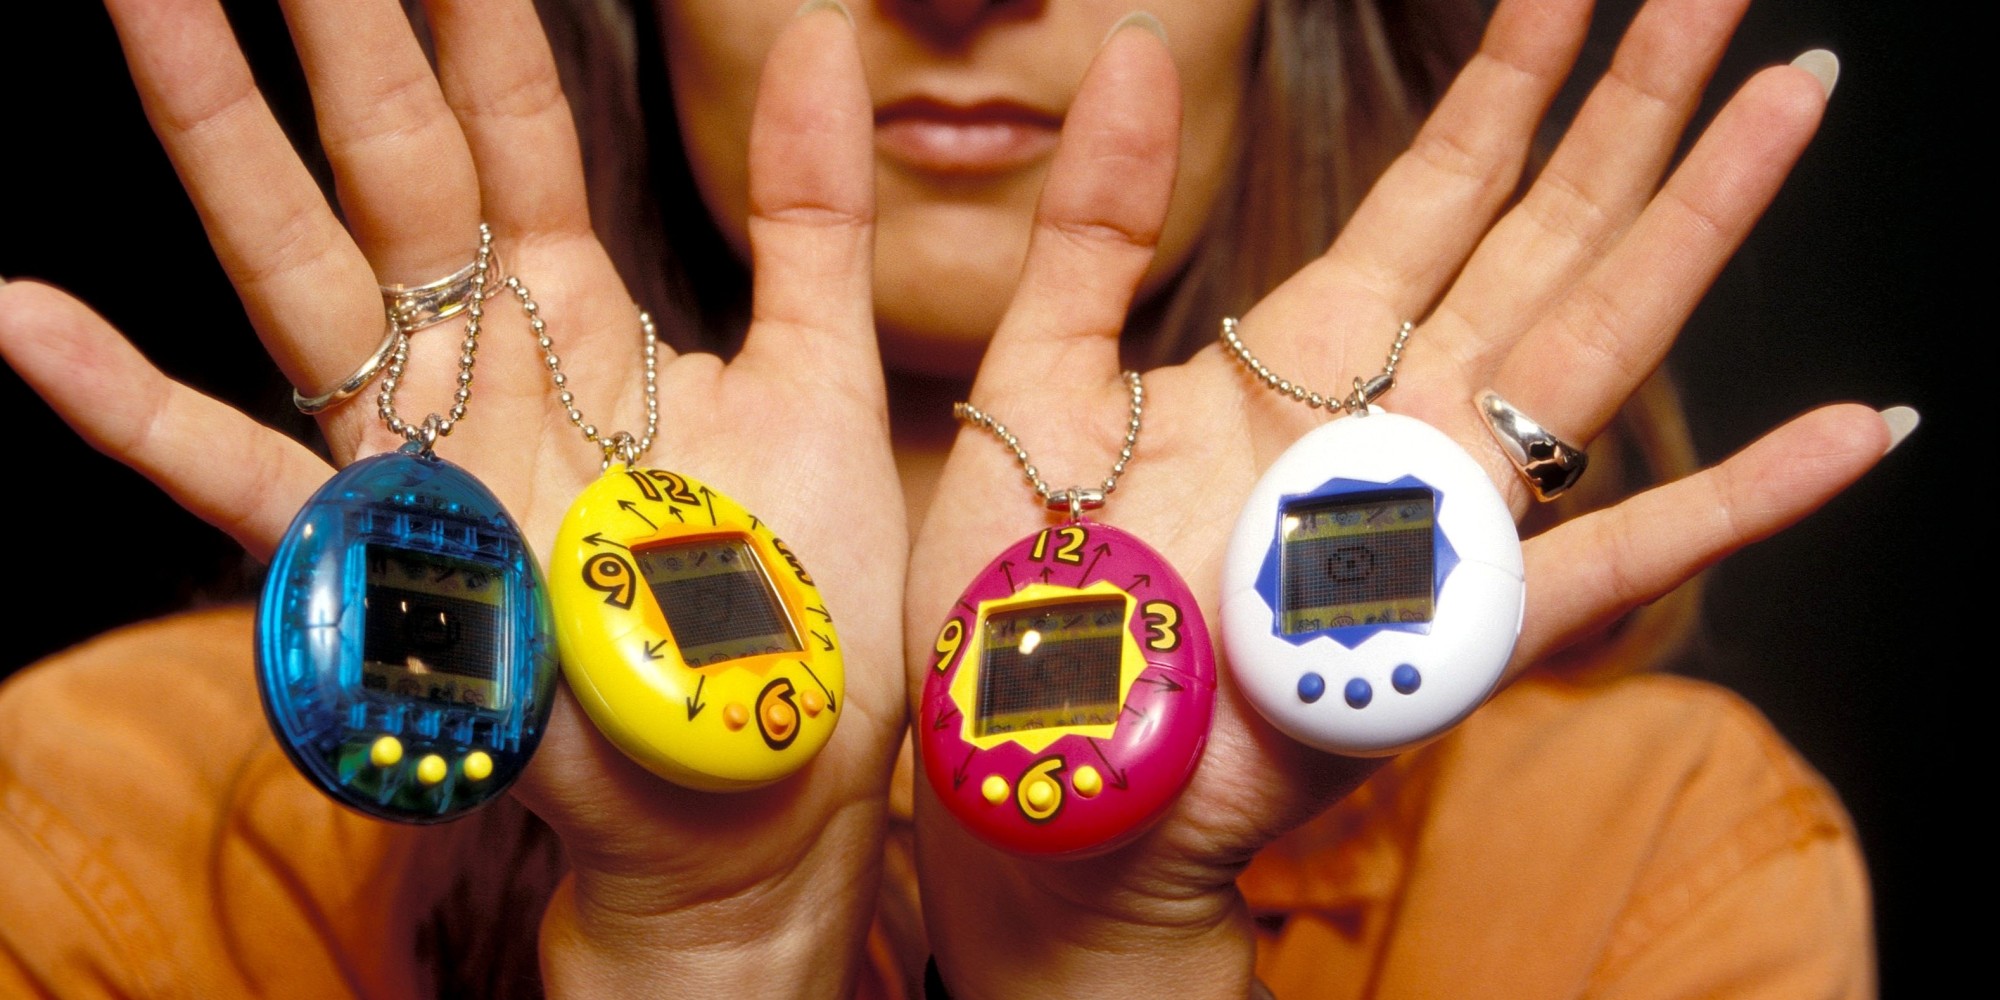 Tamagotchi Is Coming Back To The U.S Next Year | HuffPost